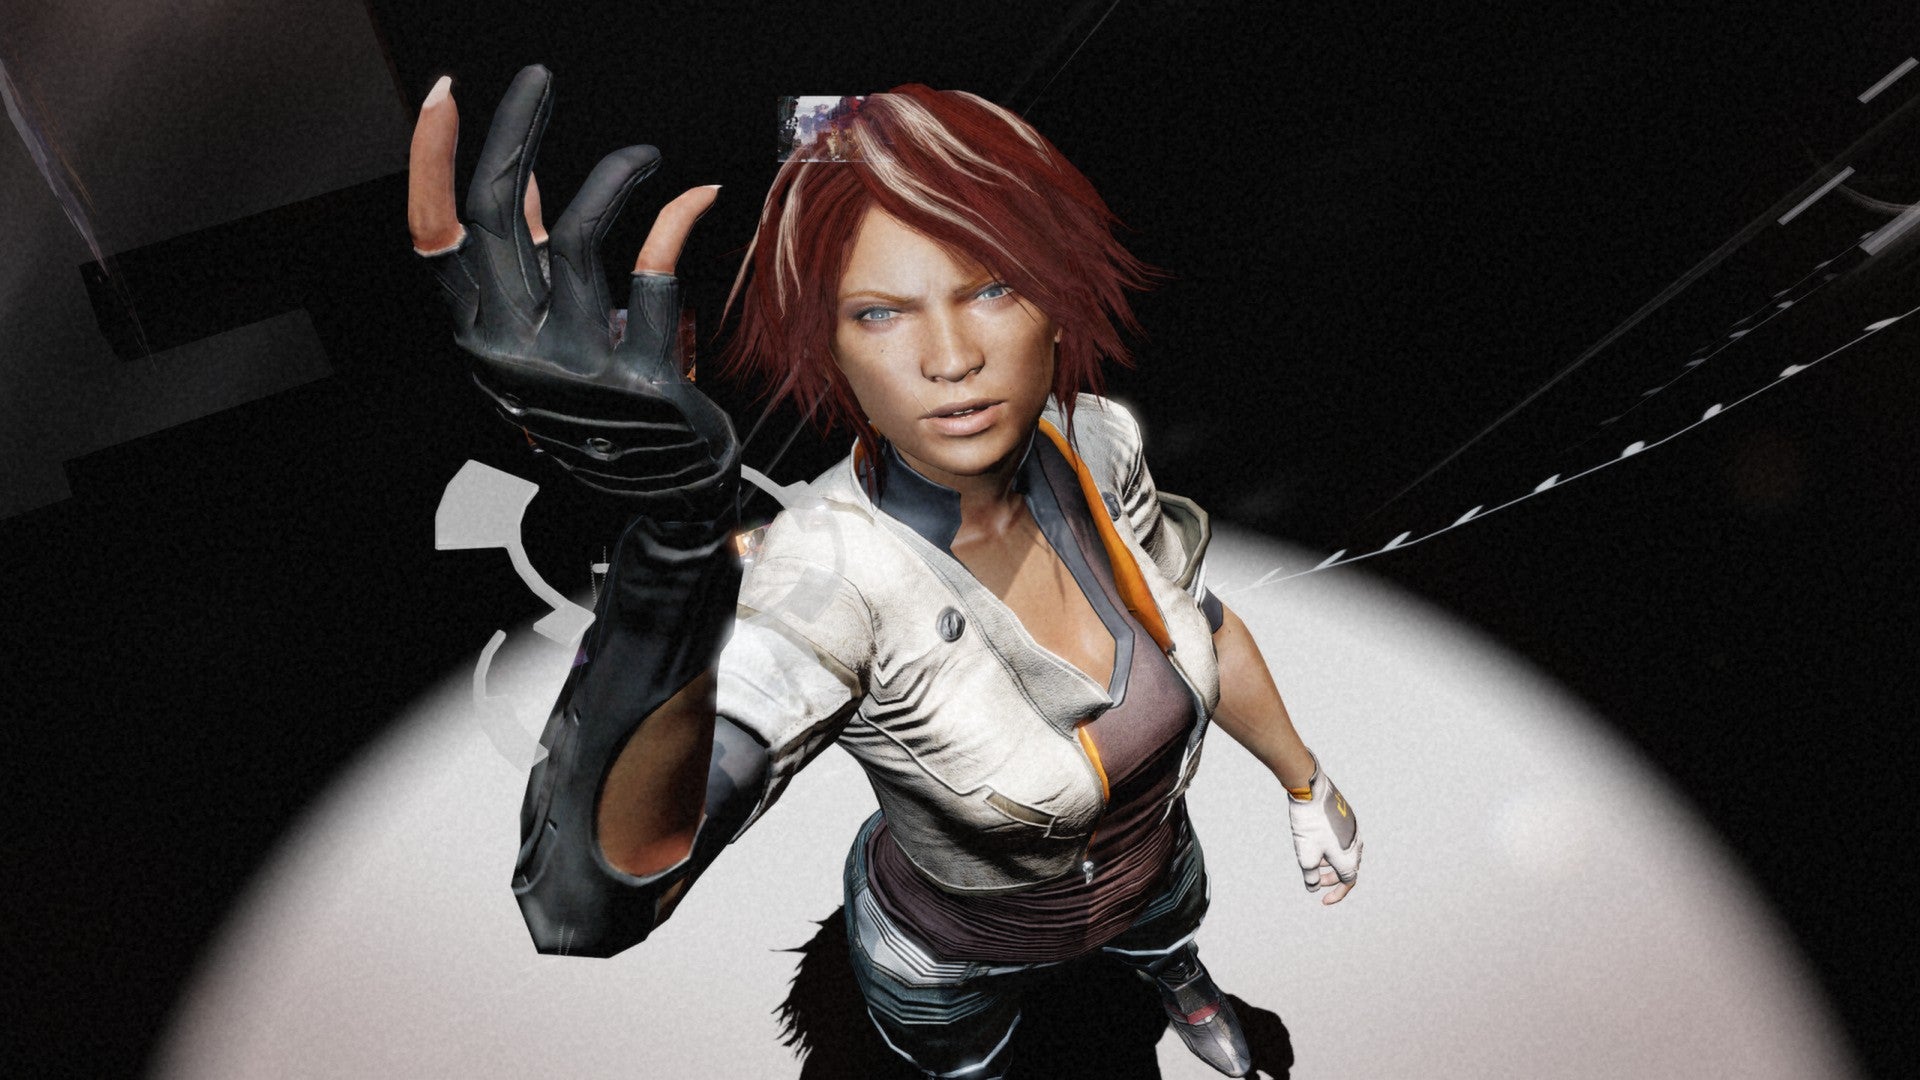 Promotional image of Remember Me protagonist Nilin